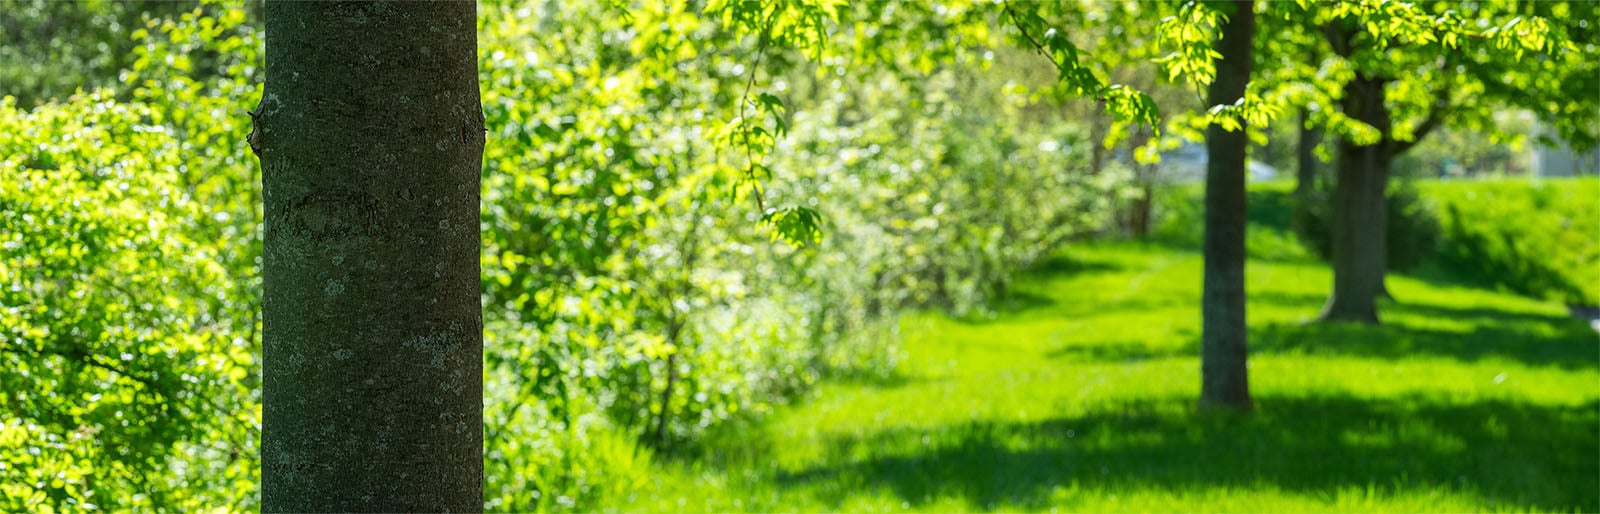 A sunny, verdant orchard with close focus on the textured bark of a tree trunk on the left, contrasting with the blurred, leafy green backdrop.